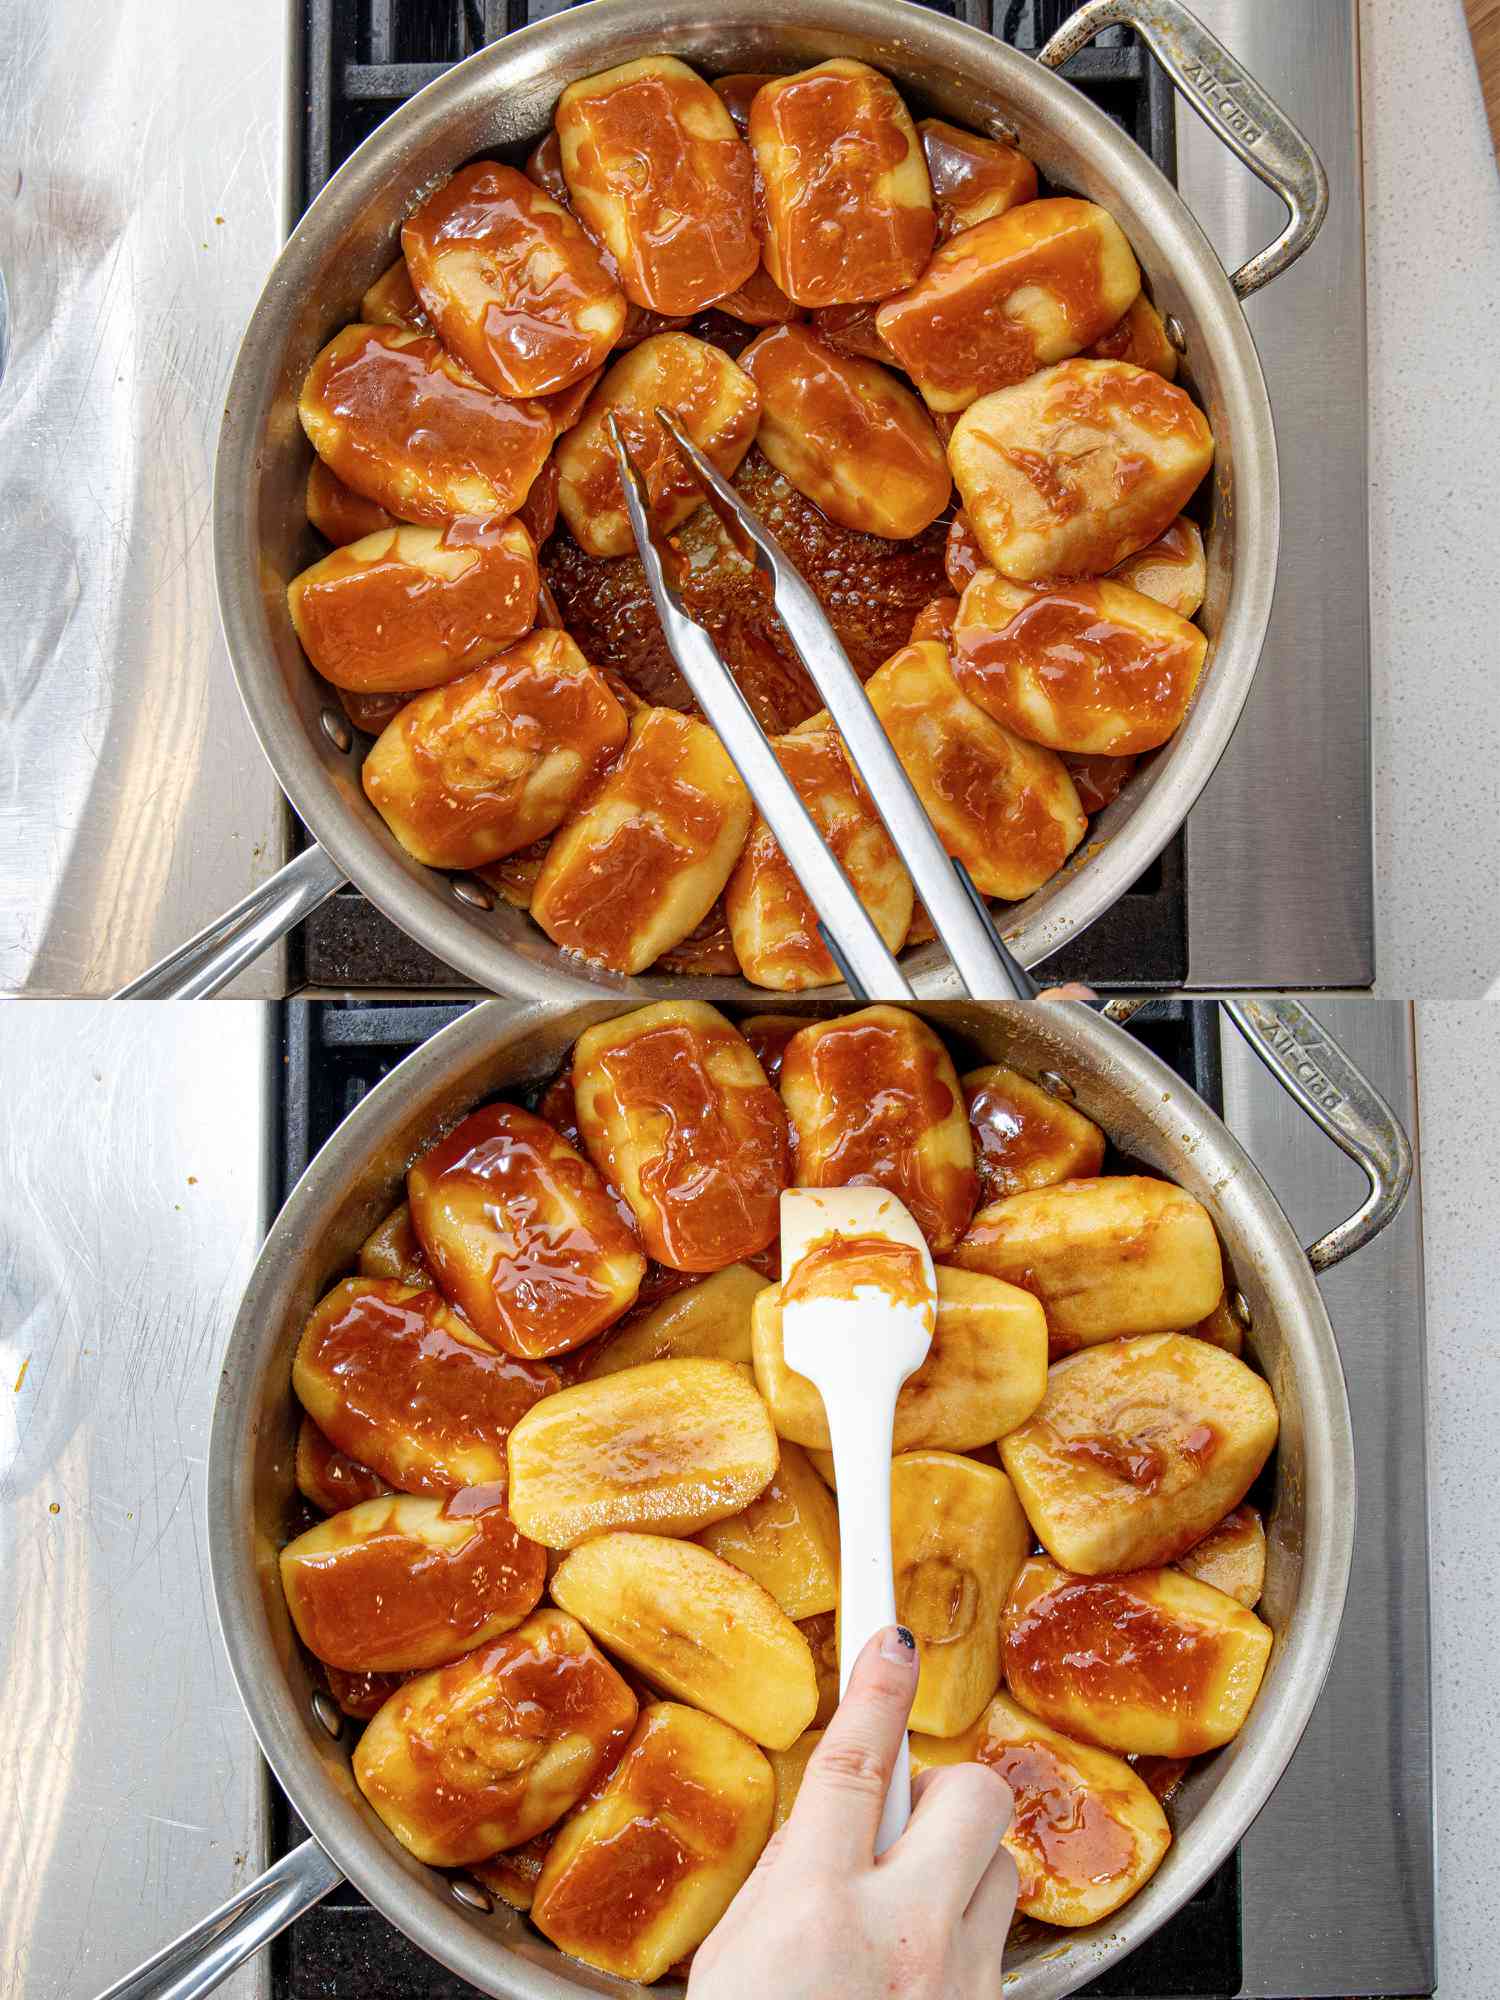 Two image collage of overhead view of creating second layer of apples covered in caramel and pushing down with a silicone spatual